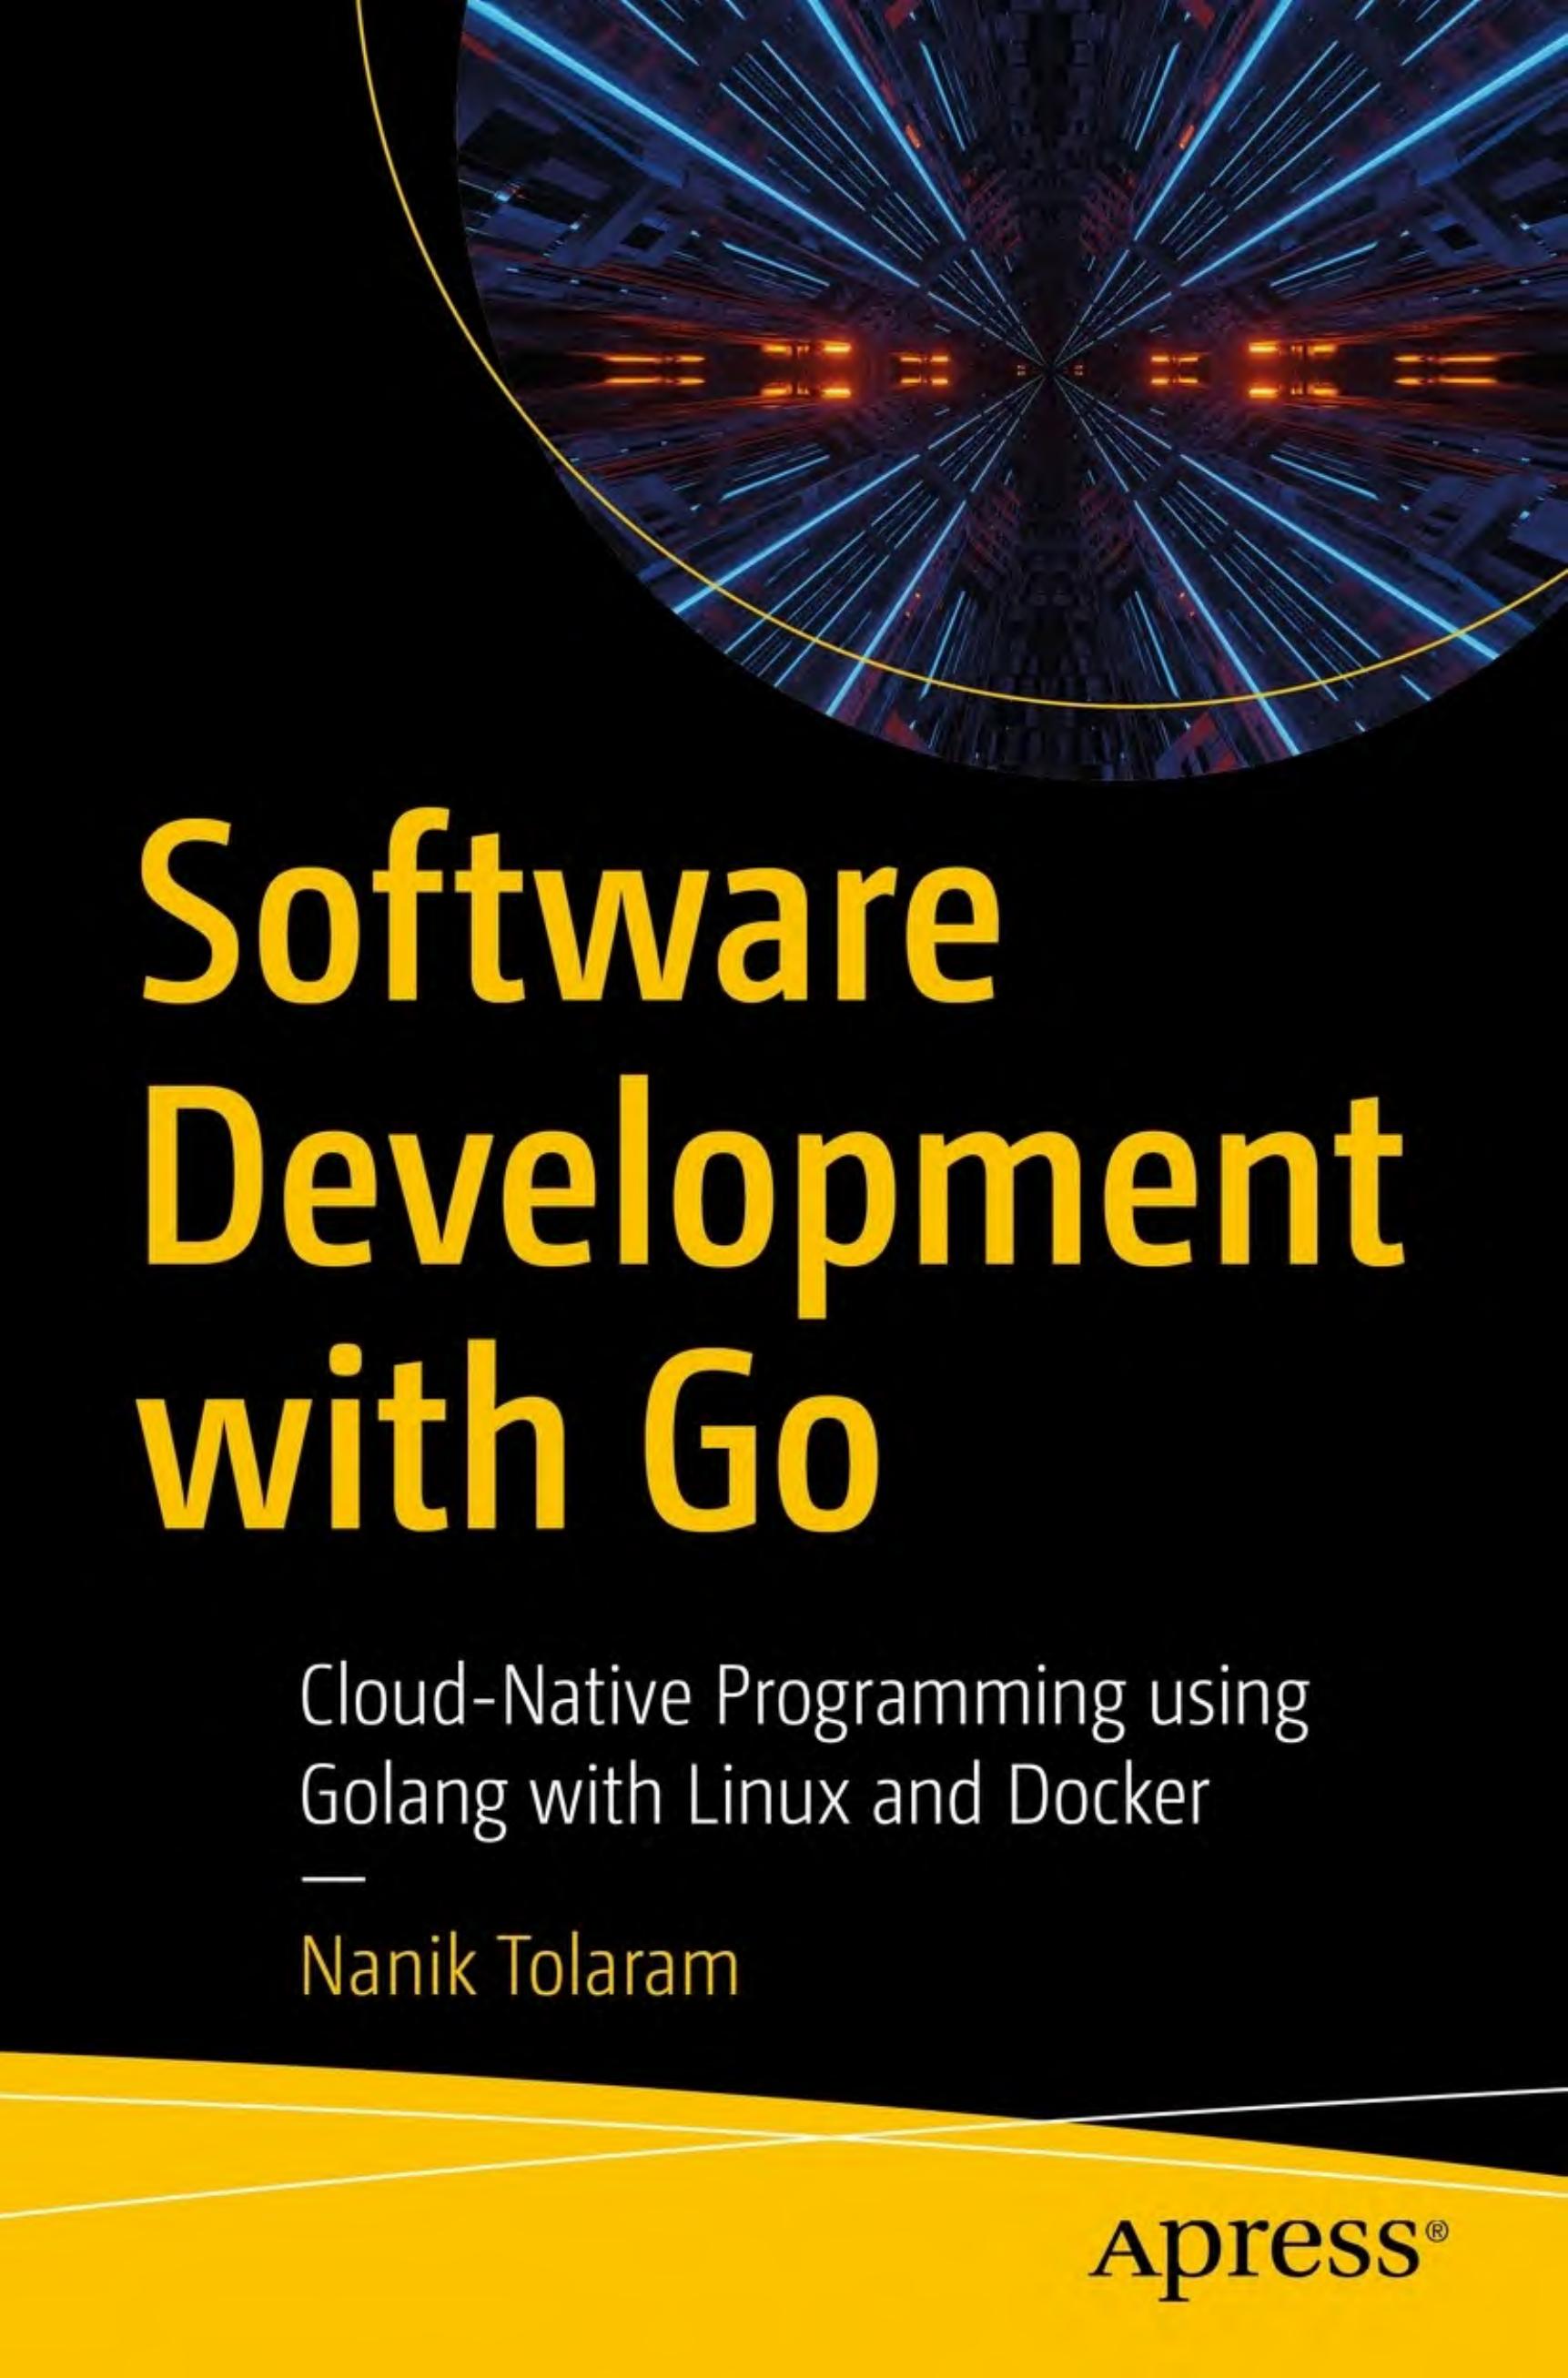 Software Development with Go. Cloud-Native Programming using Golang with Linux and Docker by N. Tolaram